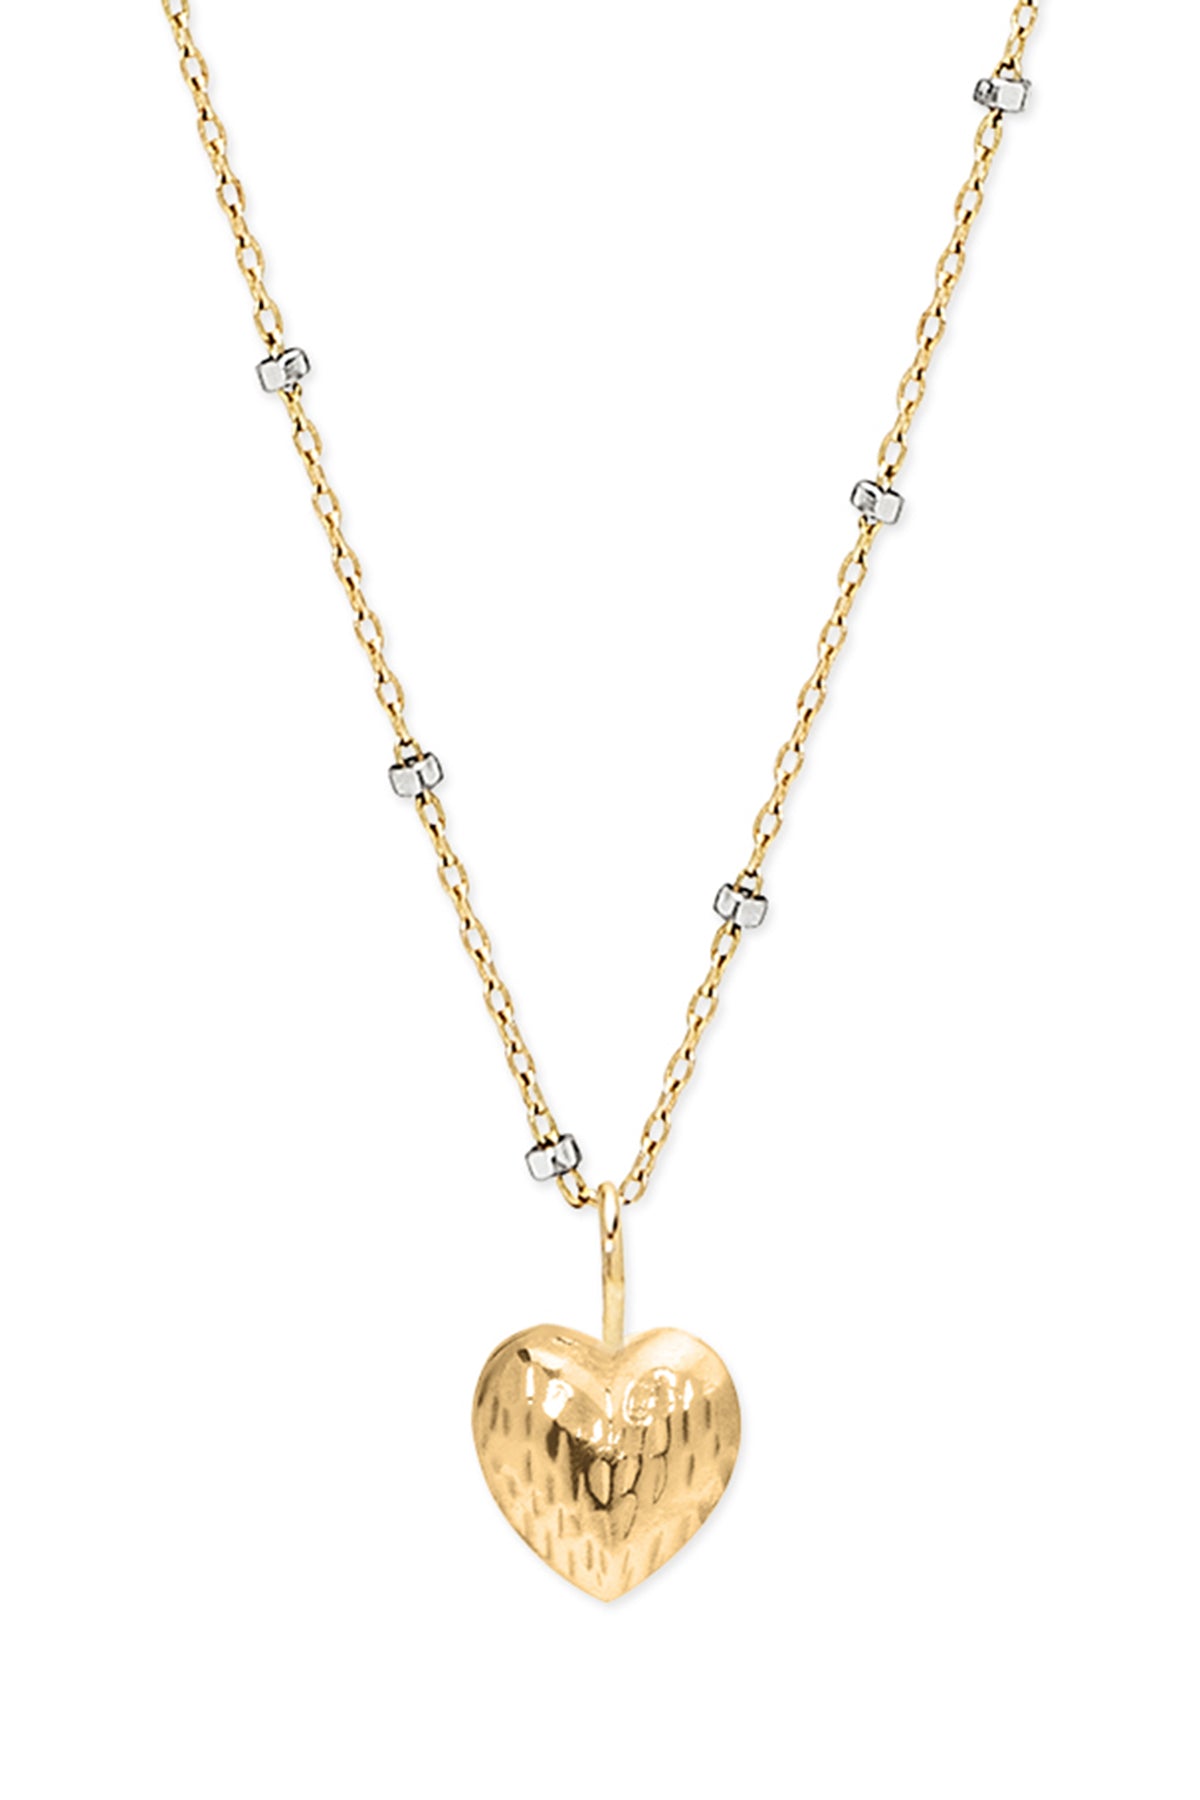   DOUBLE FACE HEART NECKLACE BY PHYLLIS AND ROSIE 